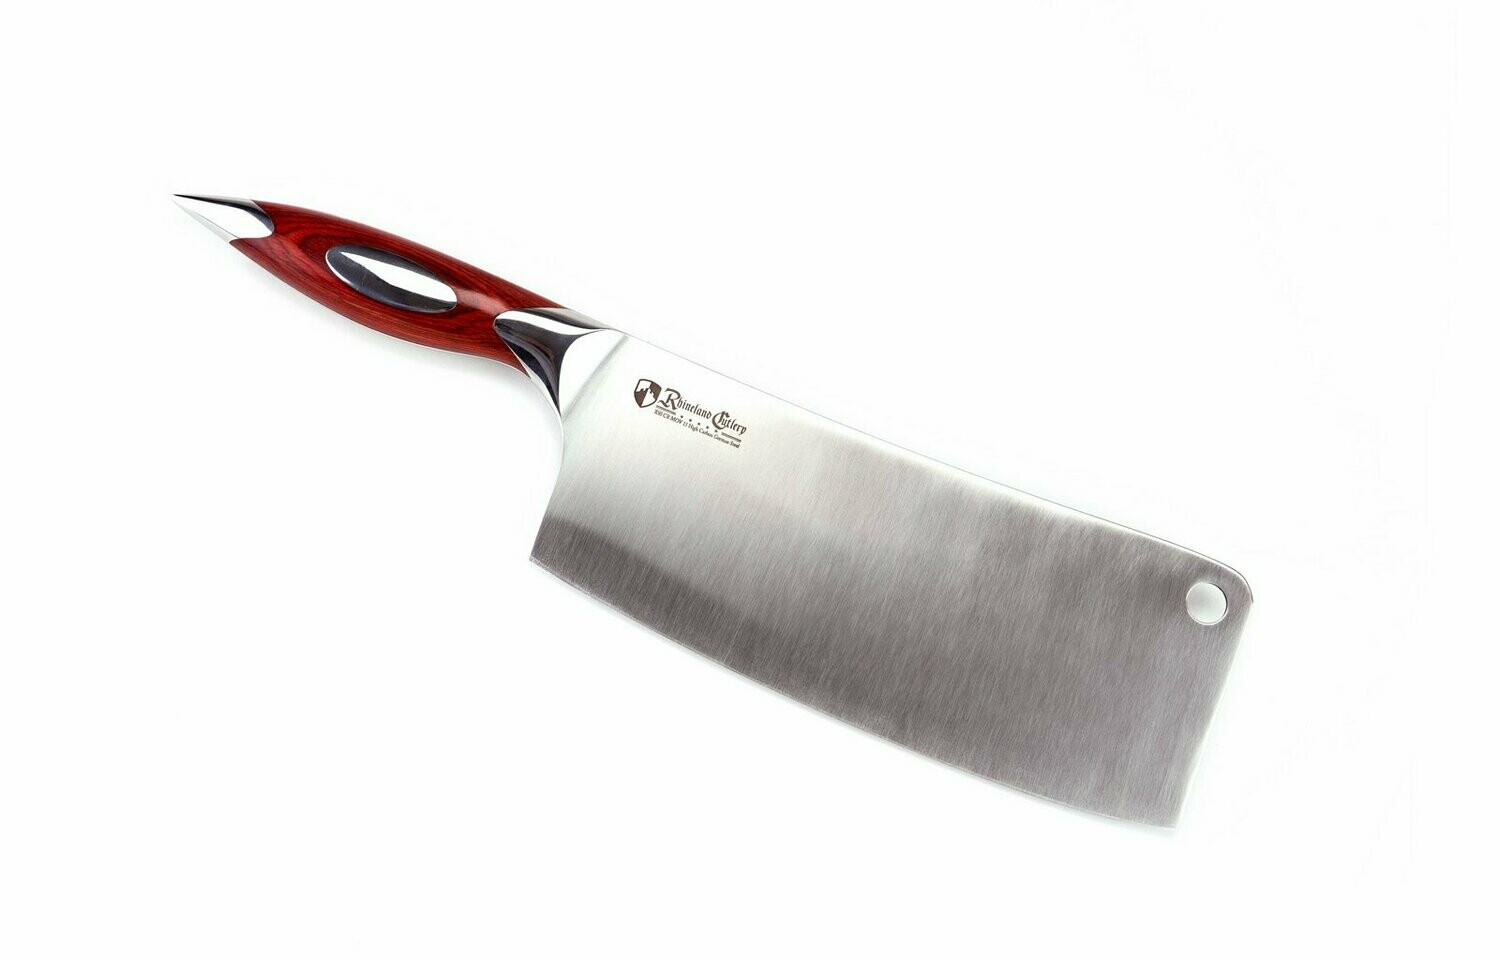 8″ Meat Cleaver